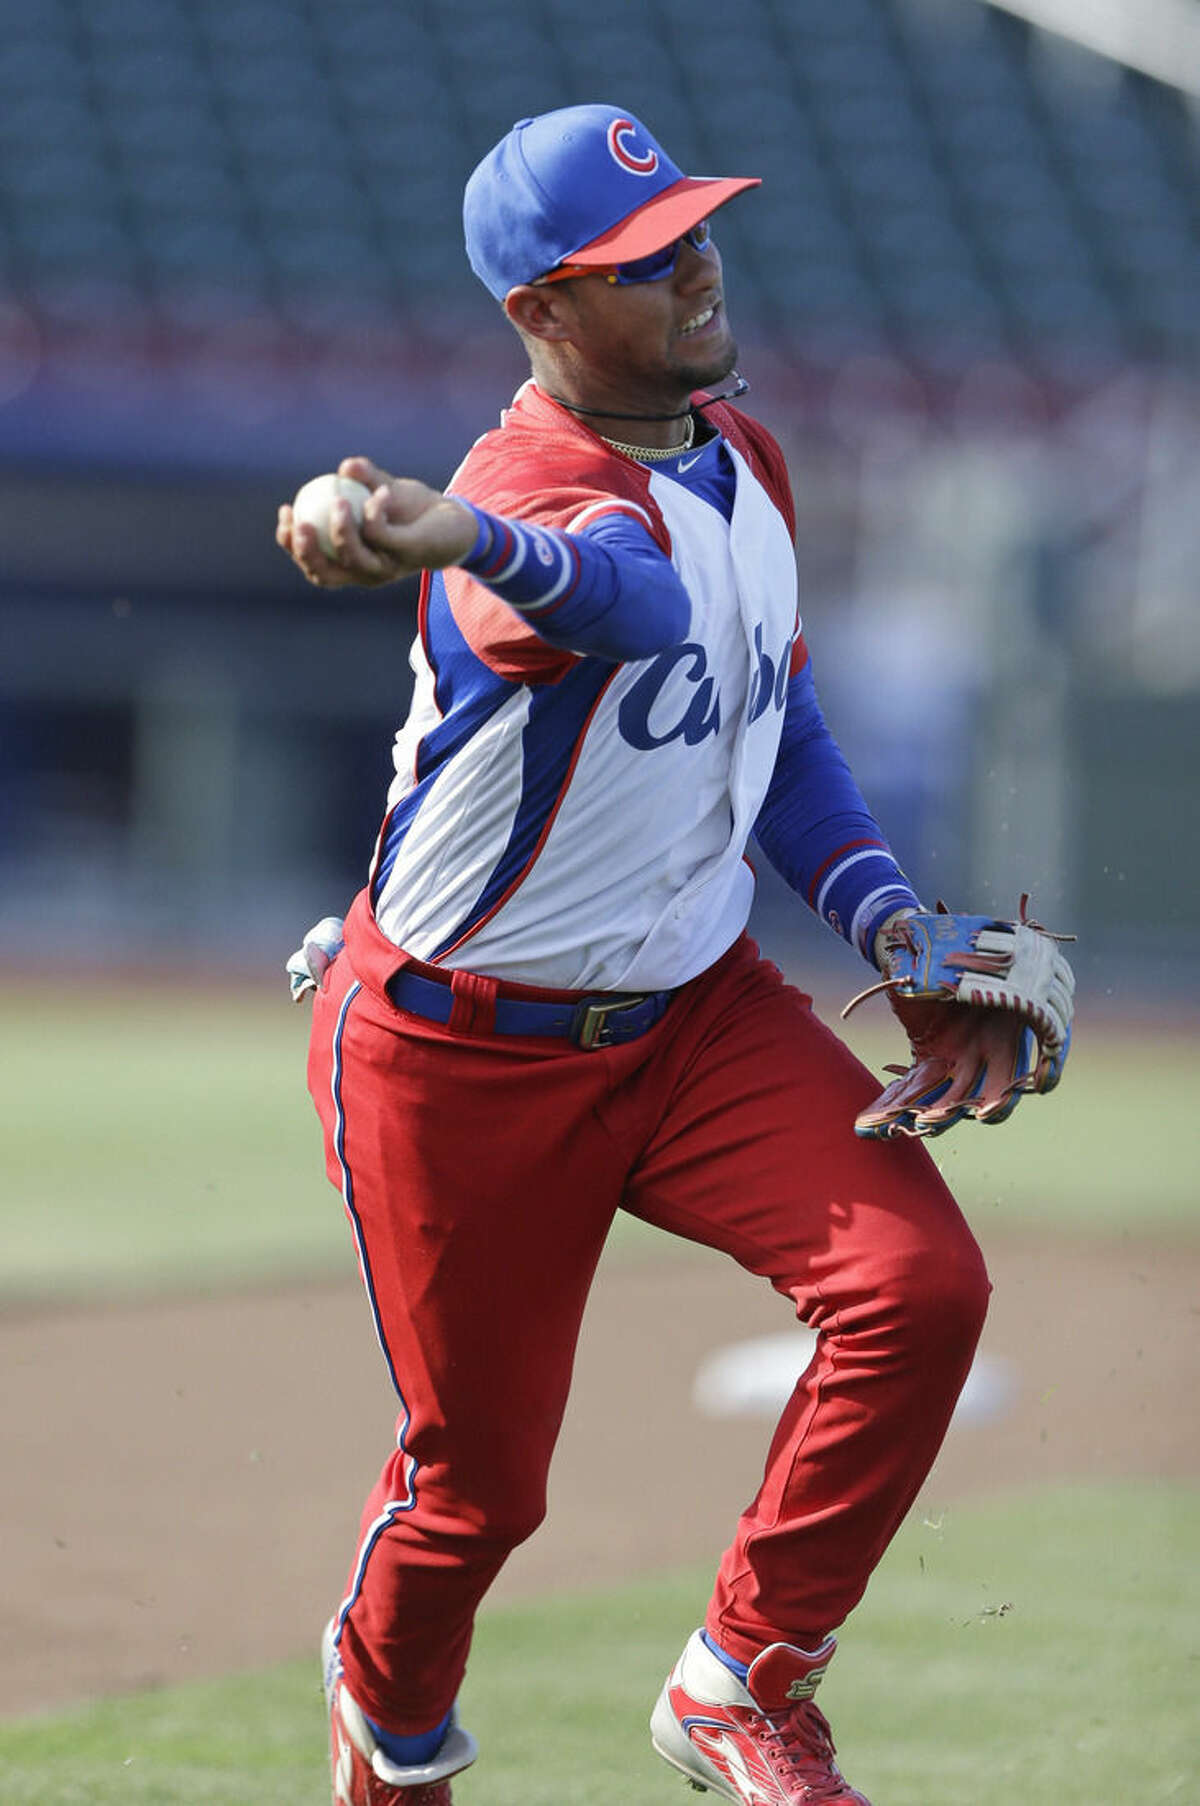 FILE - In this July 19, 2013 file photo, Cuba third baseman Yulieski Gourriel warms up prior to an exhibition baseball game against the United States in Papillion, Neb. A baseball official in the Dominican Republic said on Monday, Feb. 8, 2016, that Gourriel has abandoned his team at the close of the annual Caribbean series. The 31-year-old was with his younger brother, Lourdes, also a highly sought player. (AP Photo/Nati Harnik, File)